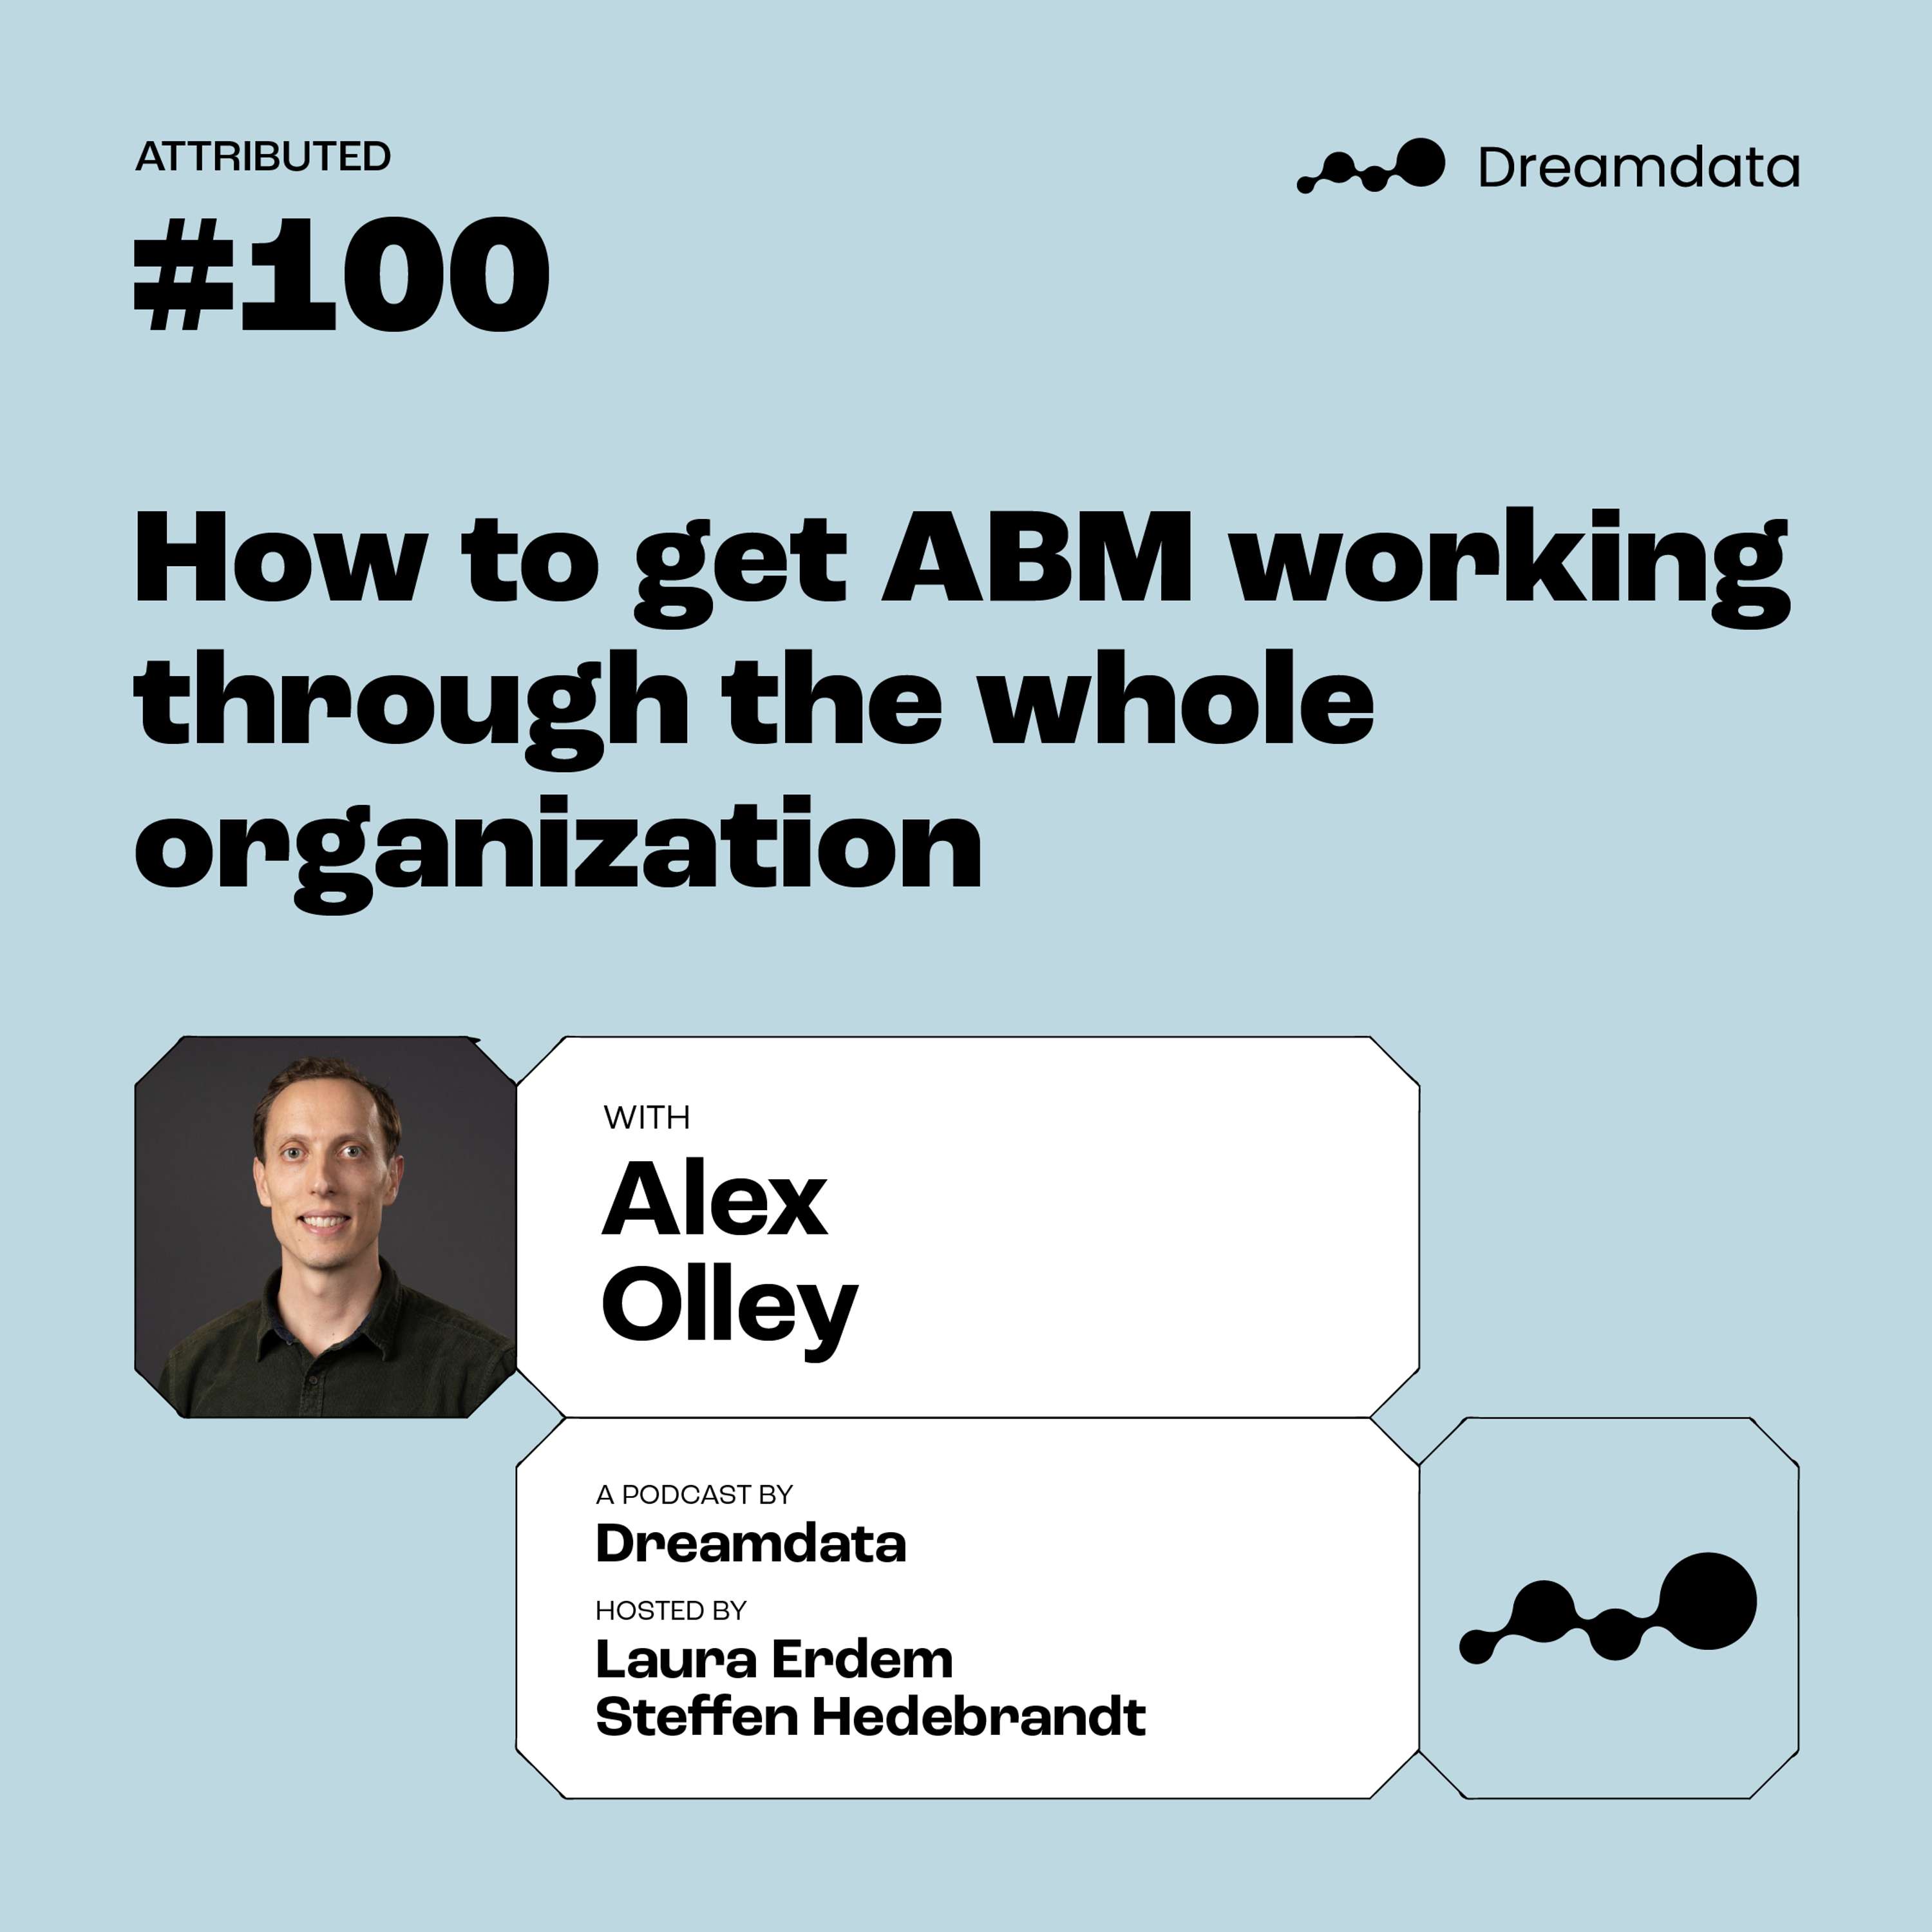 How to get ABM working through the whole organization